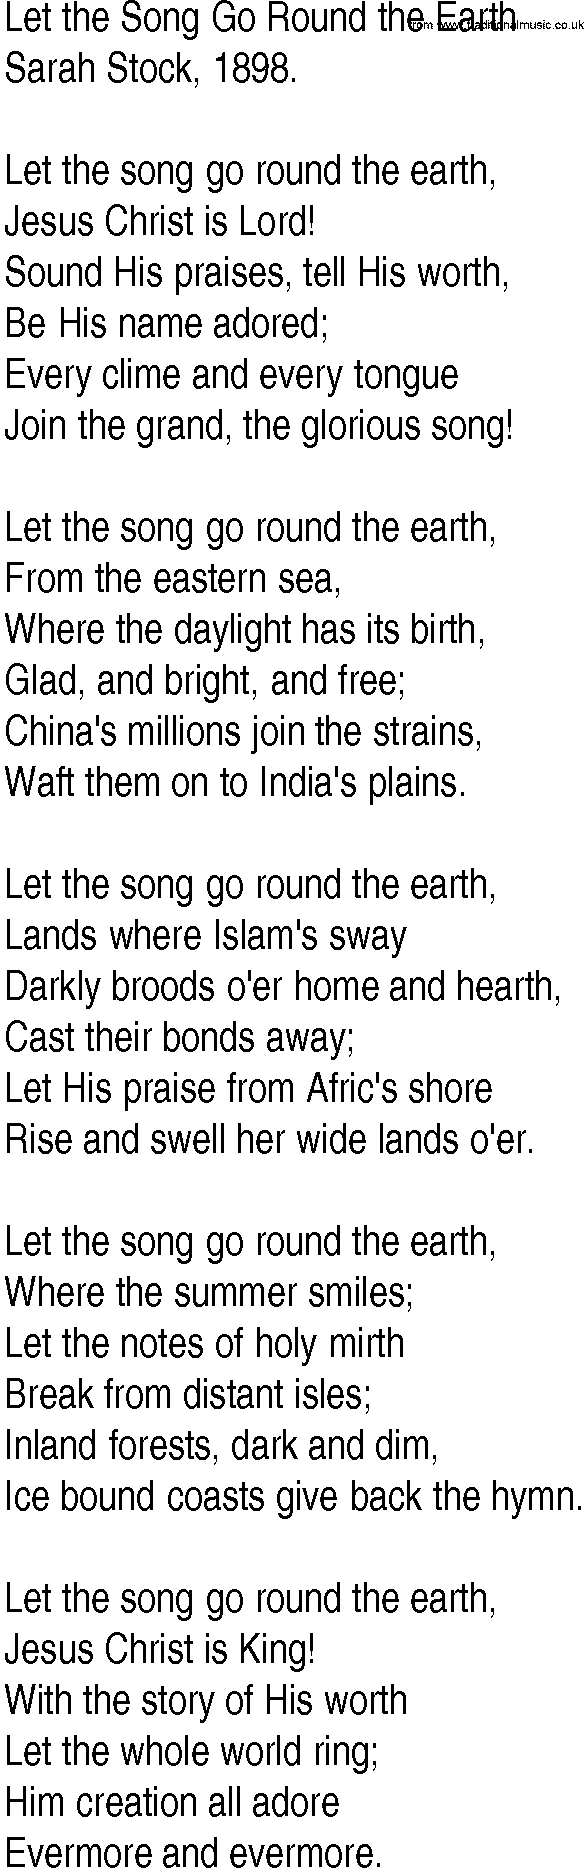 Hymn and Gospel Song: Let the Song Go Round the Earth by Sarah Stock lyrics